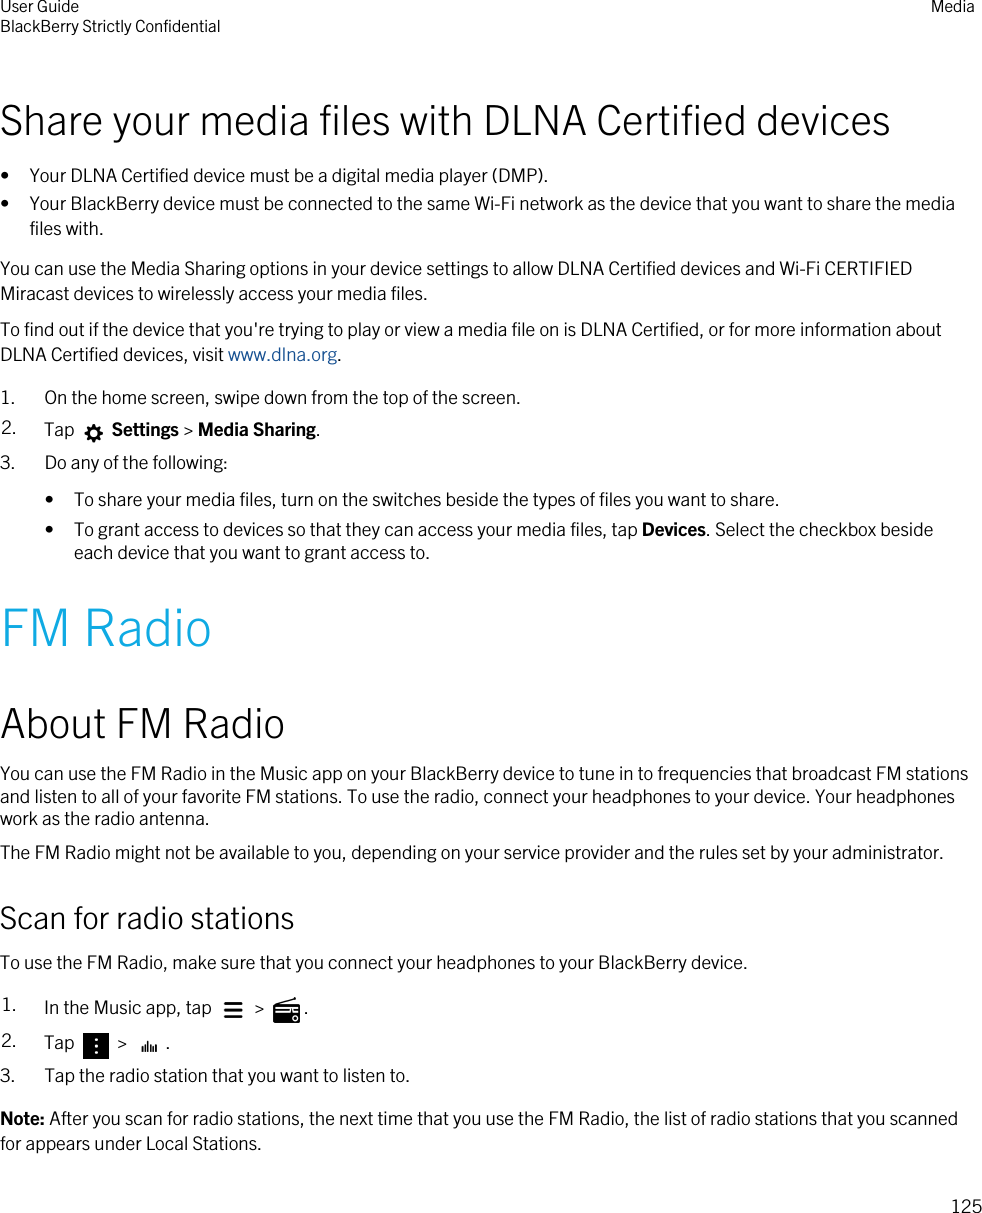 Share your media files with DLNA Certified devices• Your DLNA Certified device must be a digital media player (DMP).• Your BlackBerry device must be connected to the same Wi-Fi network as the device that you want to share the media files with.You can use the Media Sharing options in your device settings to allow DLNA Certified devices and Wi-Fi CERTIFIED Miracast devices to wirelessly access your media files.To find out if the device that you&apos;re trying to play or view a media file on is DLNA Certified, or for more information about DLNA Certified devices, visit www.dlna.org.1. On the home screen, swipe down from the top of the screen.2. Tap   Settings &gt; Media Sharing.3. Do any of the following:• To share your media files, turn on the switches beside the types of files you want to share.• To grant access to devices so that they can access your media files, tap Devices. Select the checkbox beside each device that you want to grant access to.FM RadioAbout FM RadioYou can use the FM Radio in the Music app on your BlackBerry device to tune in to frequencies that broadcast FM stations and listen to all of your favorite FM stations. To use the radio, connect your headphones to your device. Your headphones work as the radio antenna.The FM Radio might not be available to you, depending on your service provider and the rules set by your administrator.Scan for radio stationsTo use the FM Radio, make sure that you connect your headphones to your BlackBerry device.1. In the Music app, tap   &gt;  .2. Tap   &gt;  .3. Tap the radio station that you want to listen to.Note: After you scan for radio stations, the next time that you use the FM Radio, the list of radio stations that you scanned for appears under Local Stations.User GuideBlackBerry Strictly Confidential Media125